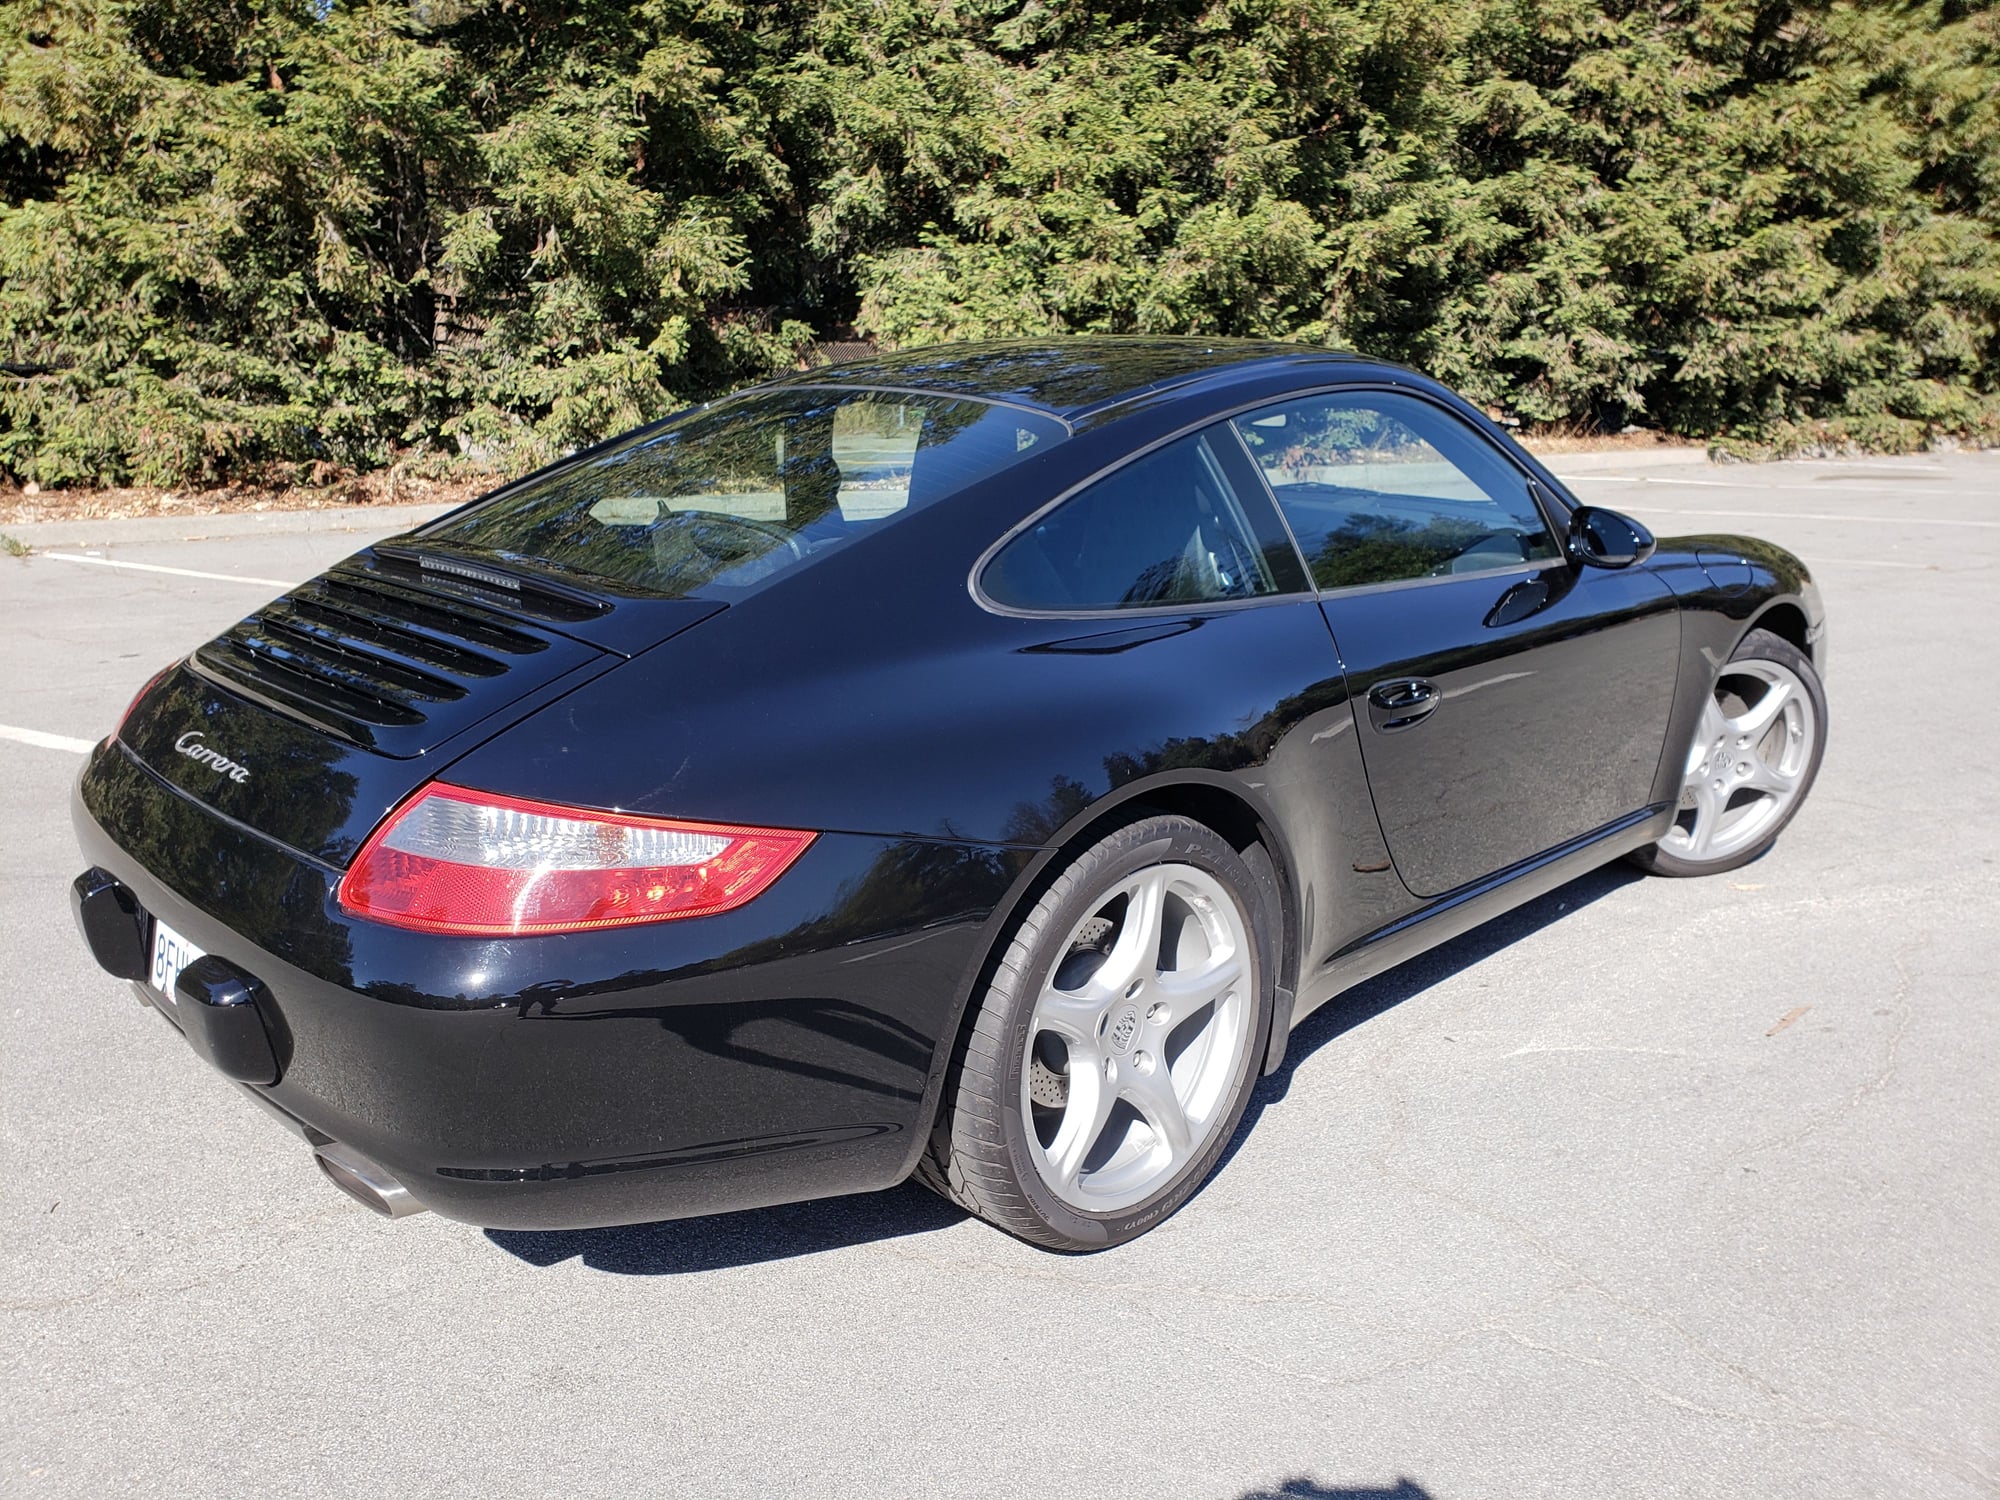 2008 Porsche 911 - 2008 911 (997) Carrera "Black Beauty" - New - VIN WP0AA29938S710590 - 23,200 Miles - 6 cyl - 2WD - Automatic - Coupe - Black - Oakland, CA 94611, United States